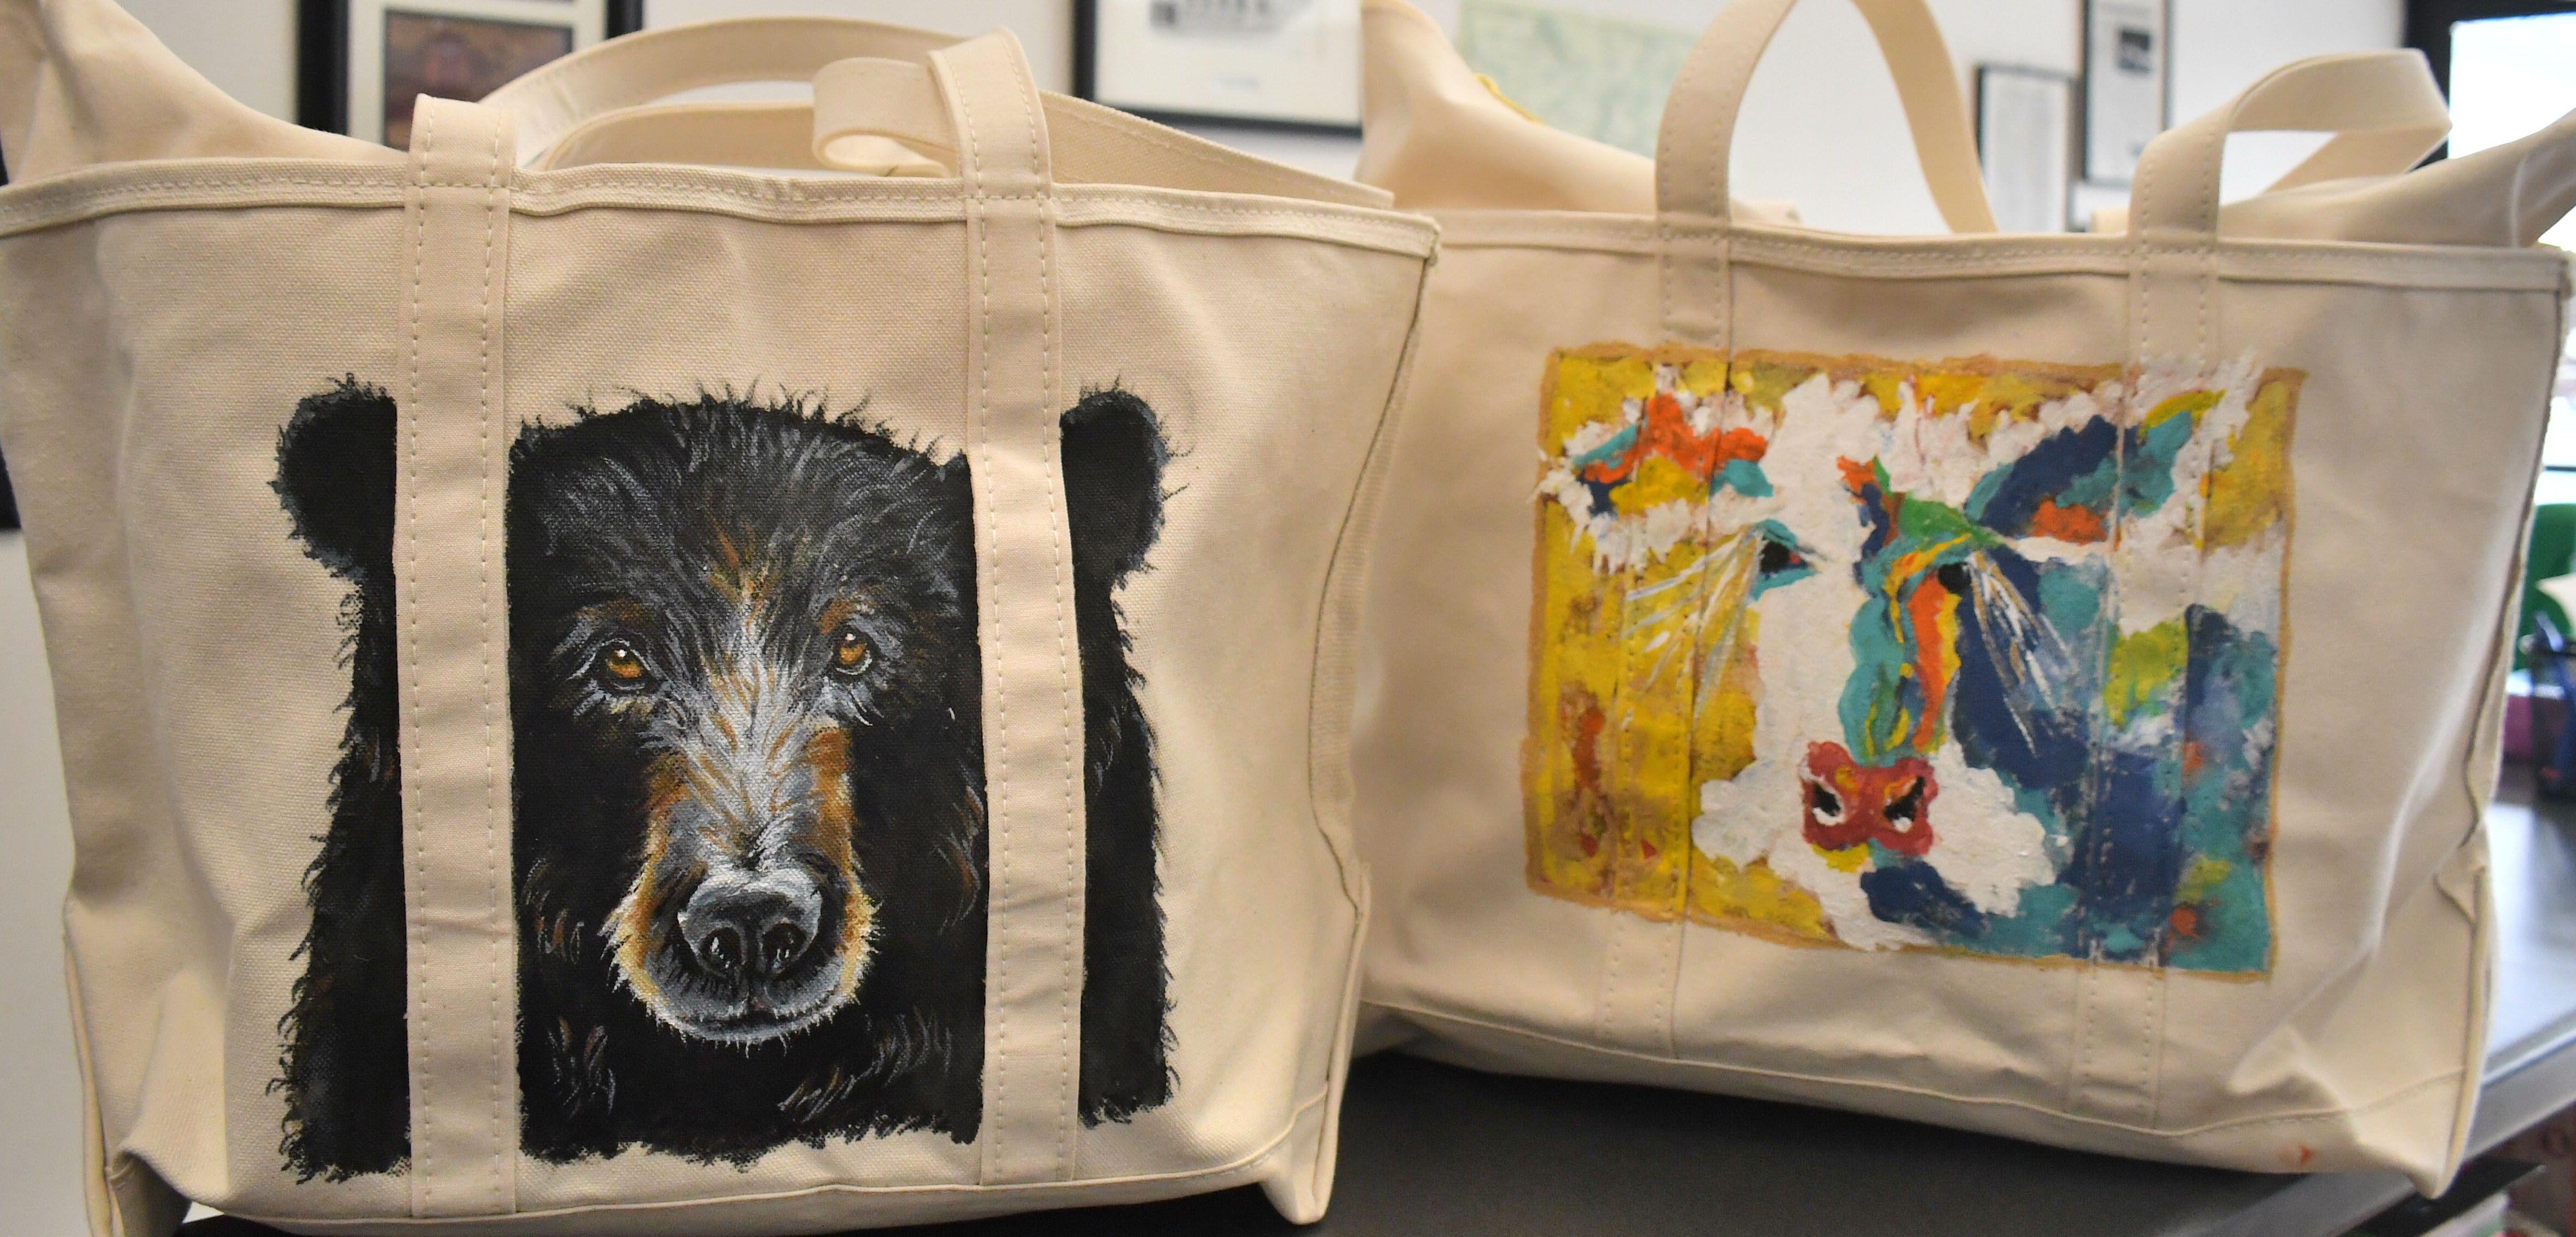 Megan Broome/The Clayton Tribune. The North Georgia Arts Guild “Original Art Treasure Tote” raffle features these 14-inch by 23-inch zippered L.L. Bean canvas totes containing over two dozen original, hand-made art treasures made by members of The North Georgia Arts Guild. The hand-painted exteriors feature a black bear by artist Penny Bradley (left) and a colorful cow by artist Kathy Beehler.